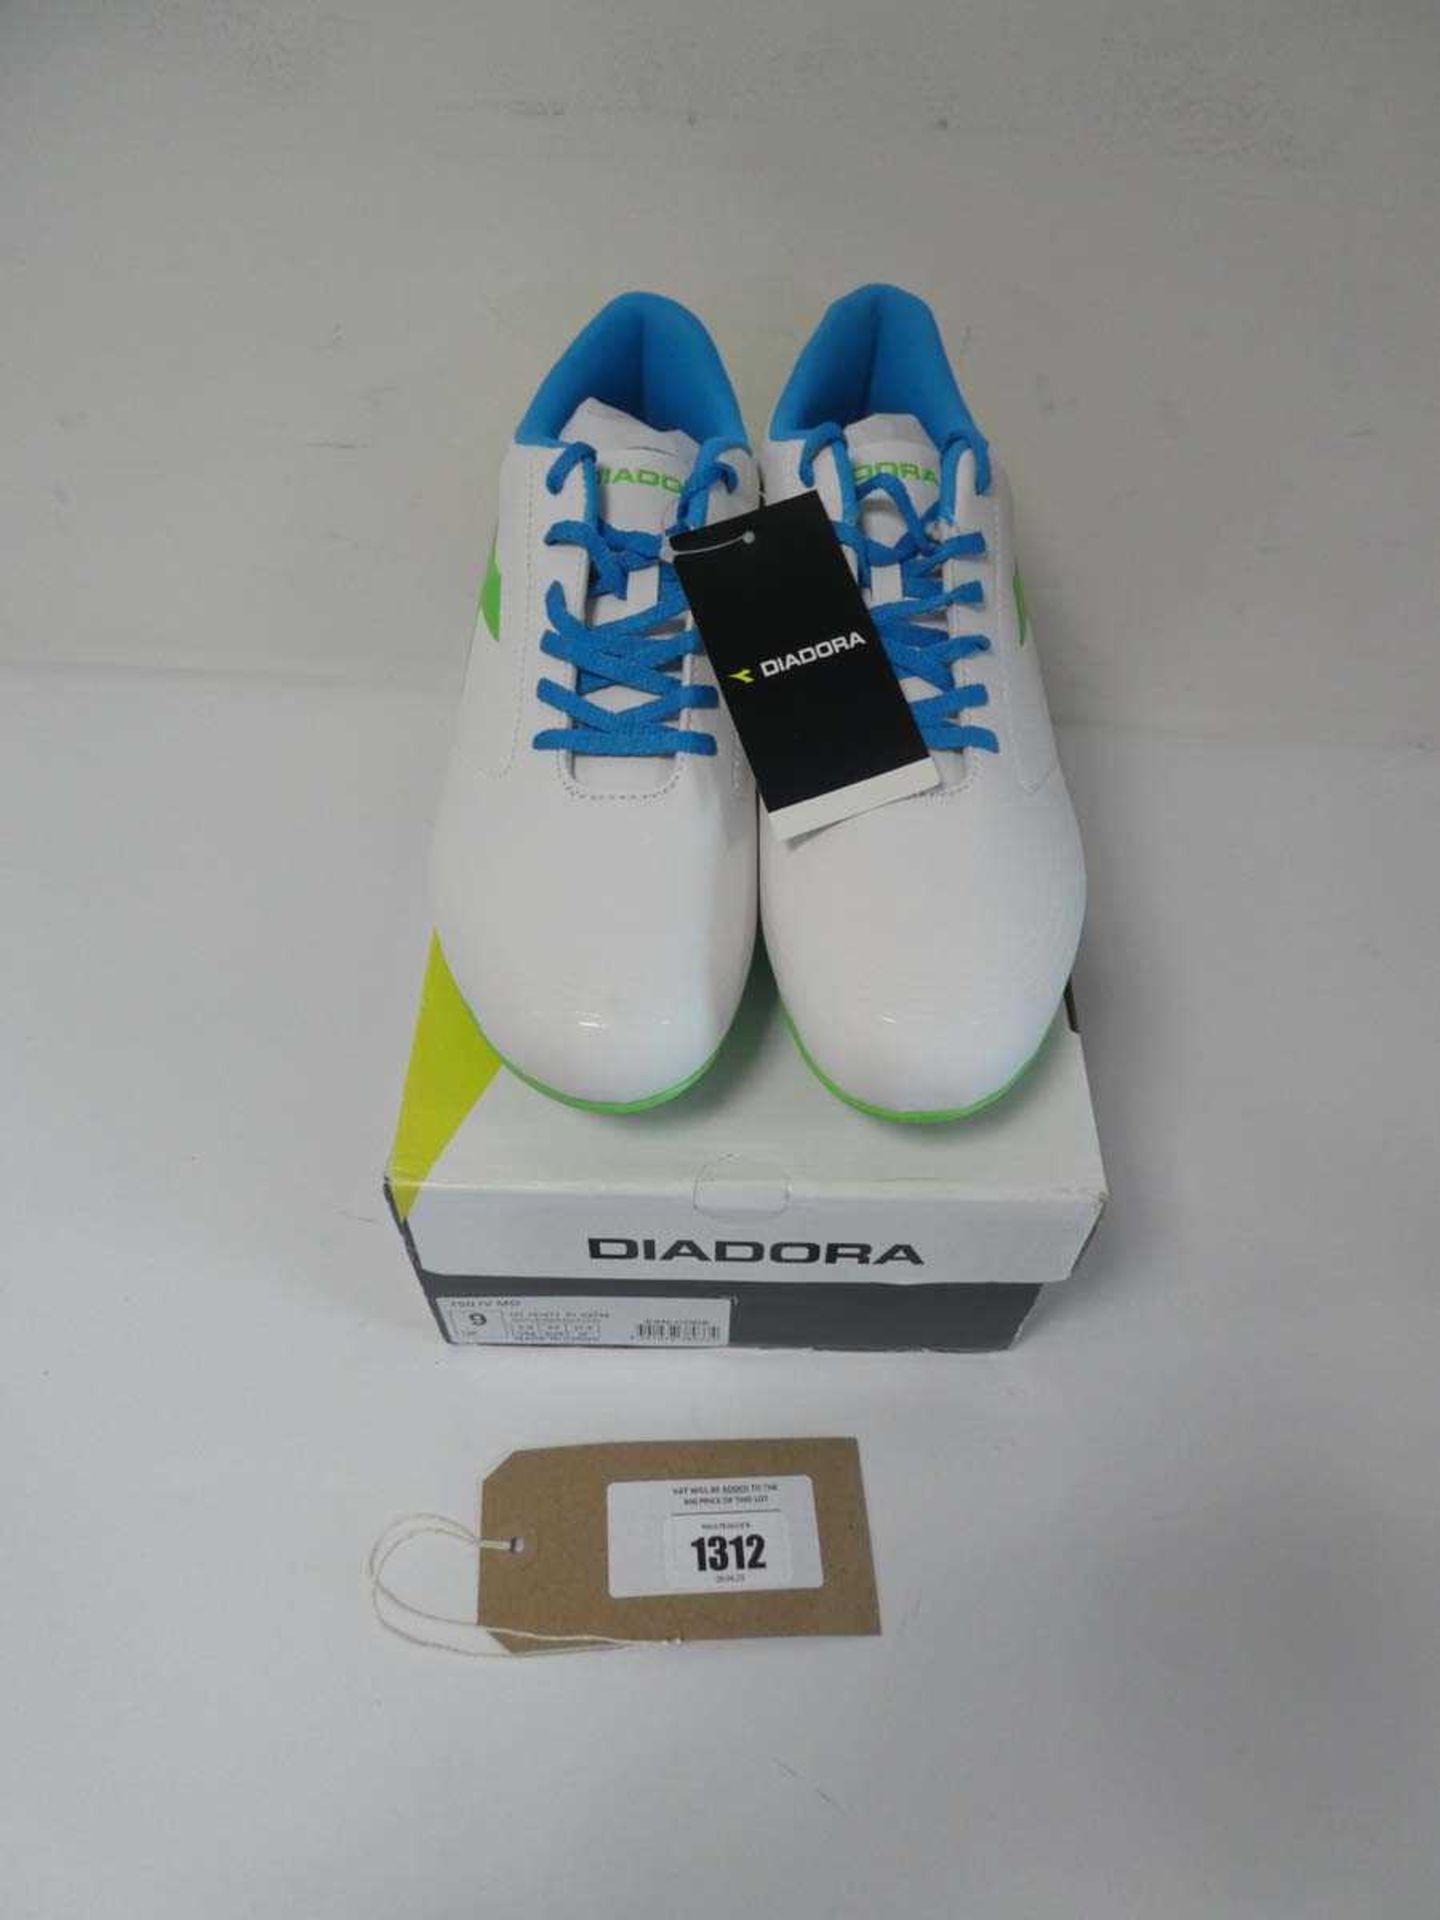 +VAT Diadora shoes in white/green size UK9 (boxed) - Image 2 of 4